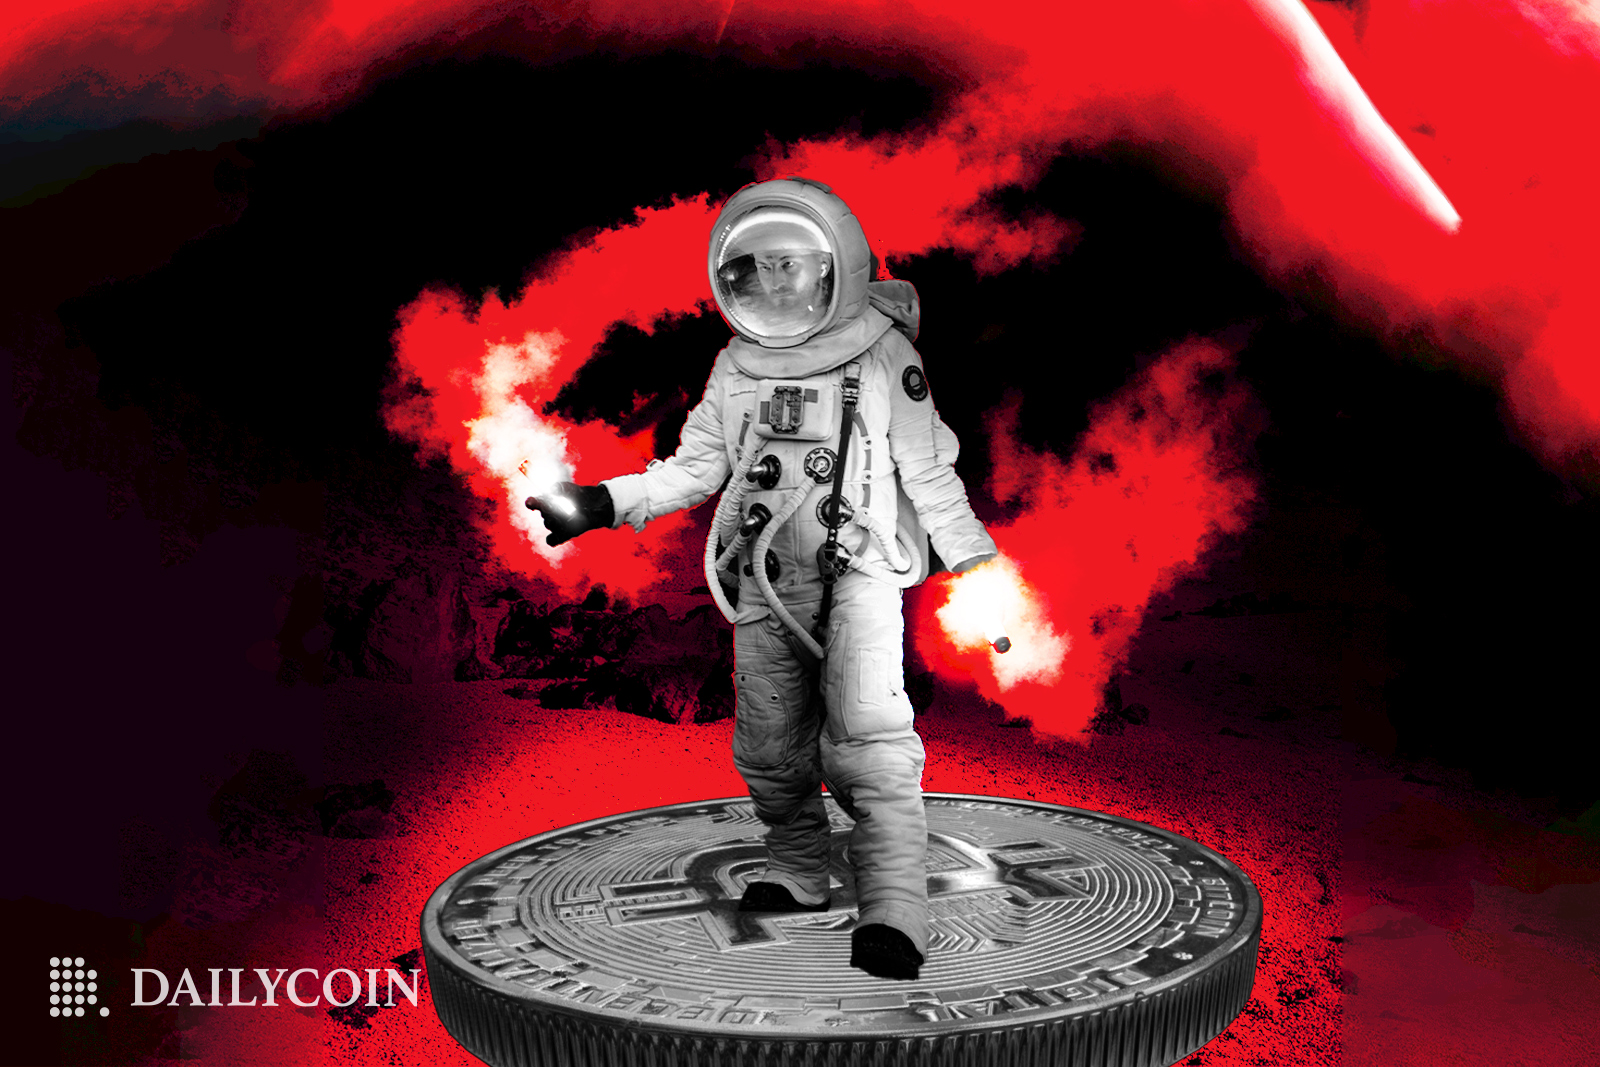 Human with aqua suit standing on a platform bitcoin holding red burning alarm lights